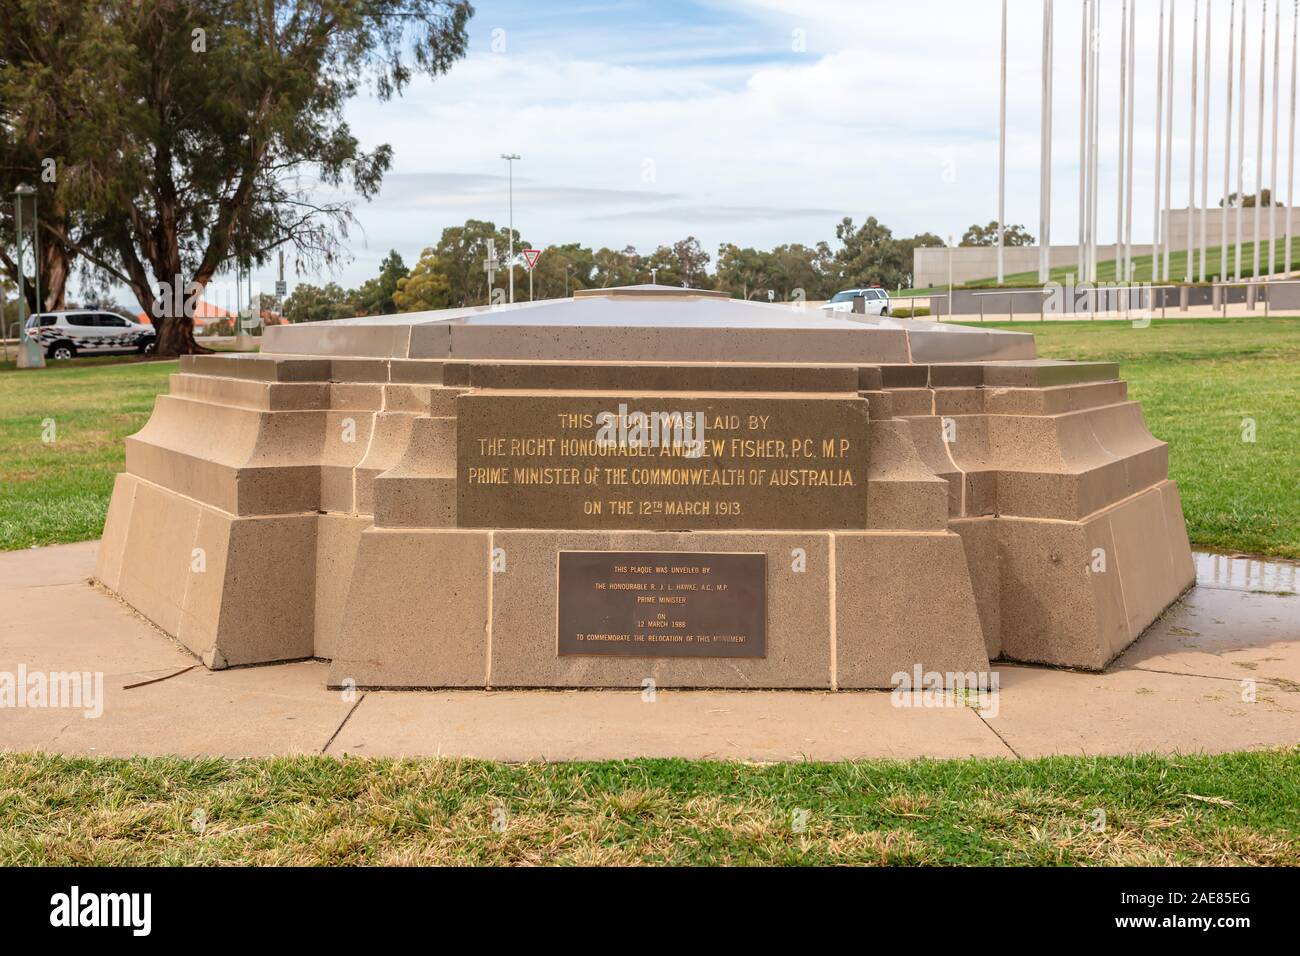 Canberra's Foundation Stone, crafted from rock quarried at Mt Gibraltar, Bowral, Australia is located in the grounds of Australian Parliament. Stock Photo